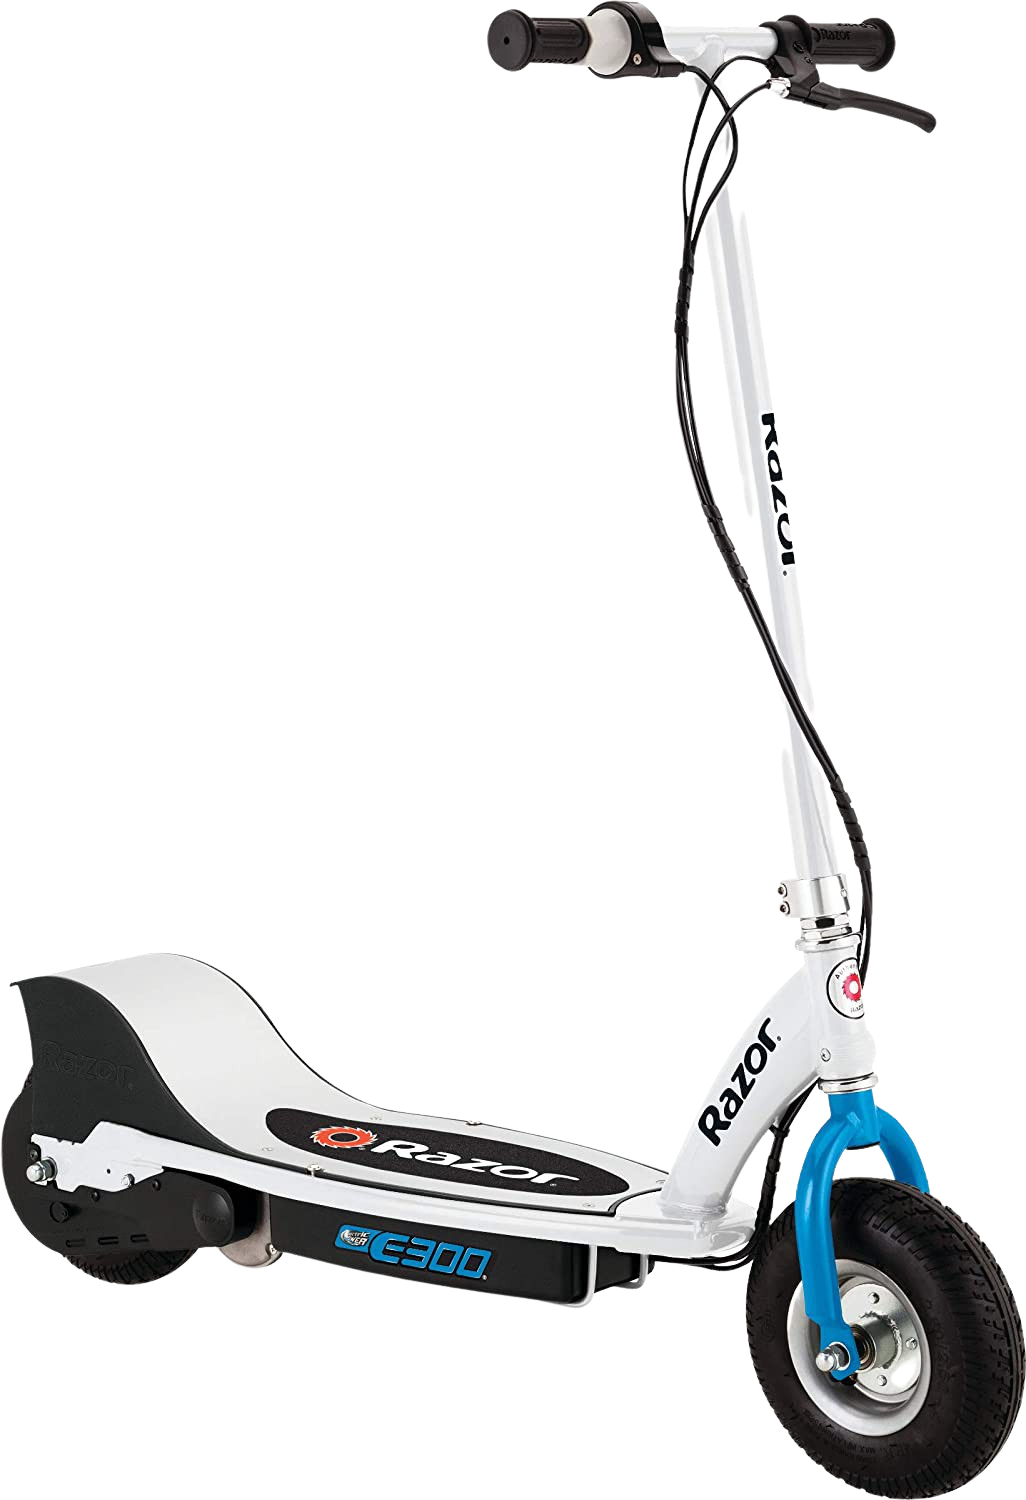 Razor E300 Up to 10 Mile Range 15 MPH 9" Tires Electric Scooter Blue White New